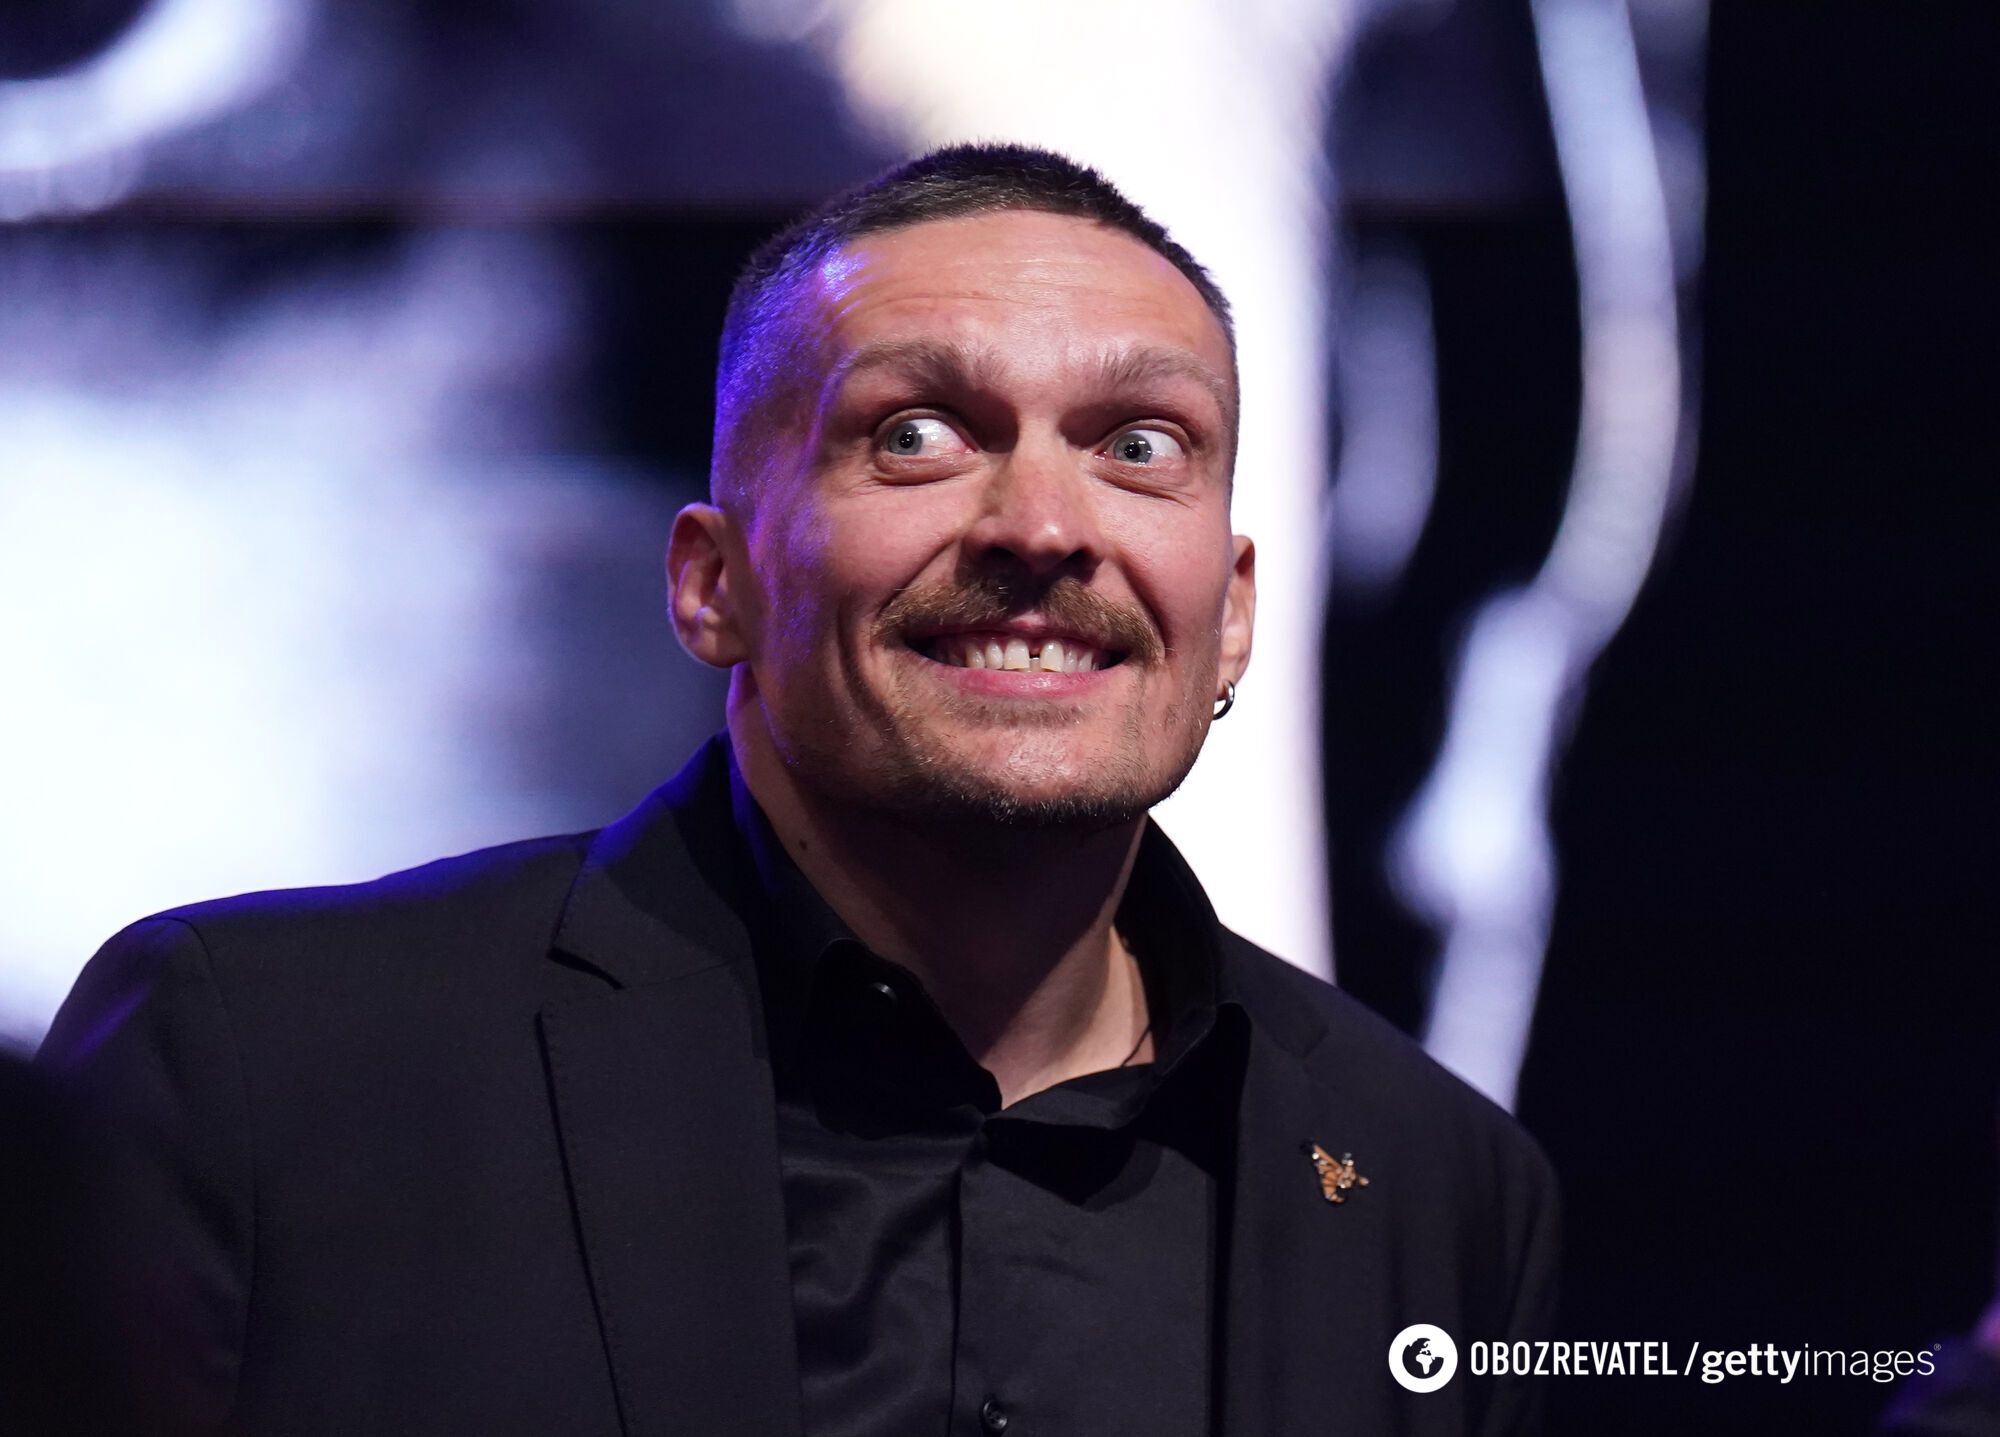 ''He looks terrible'': British fans do not believe in Fury's victory over Usyk